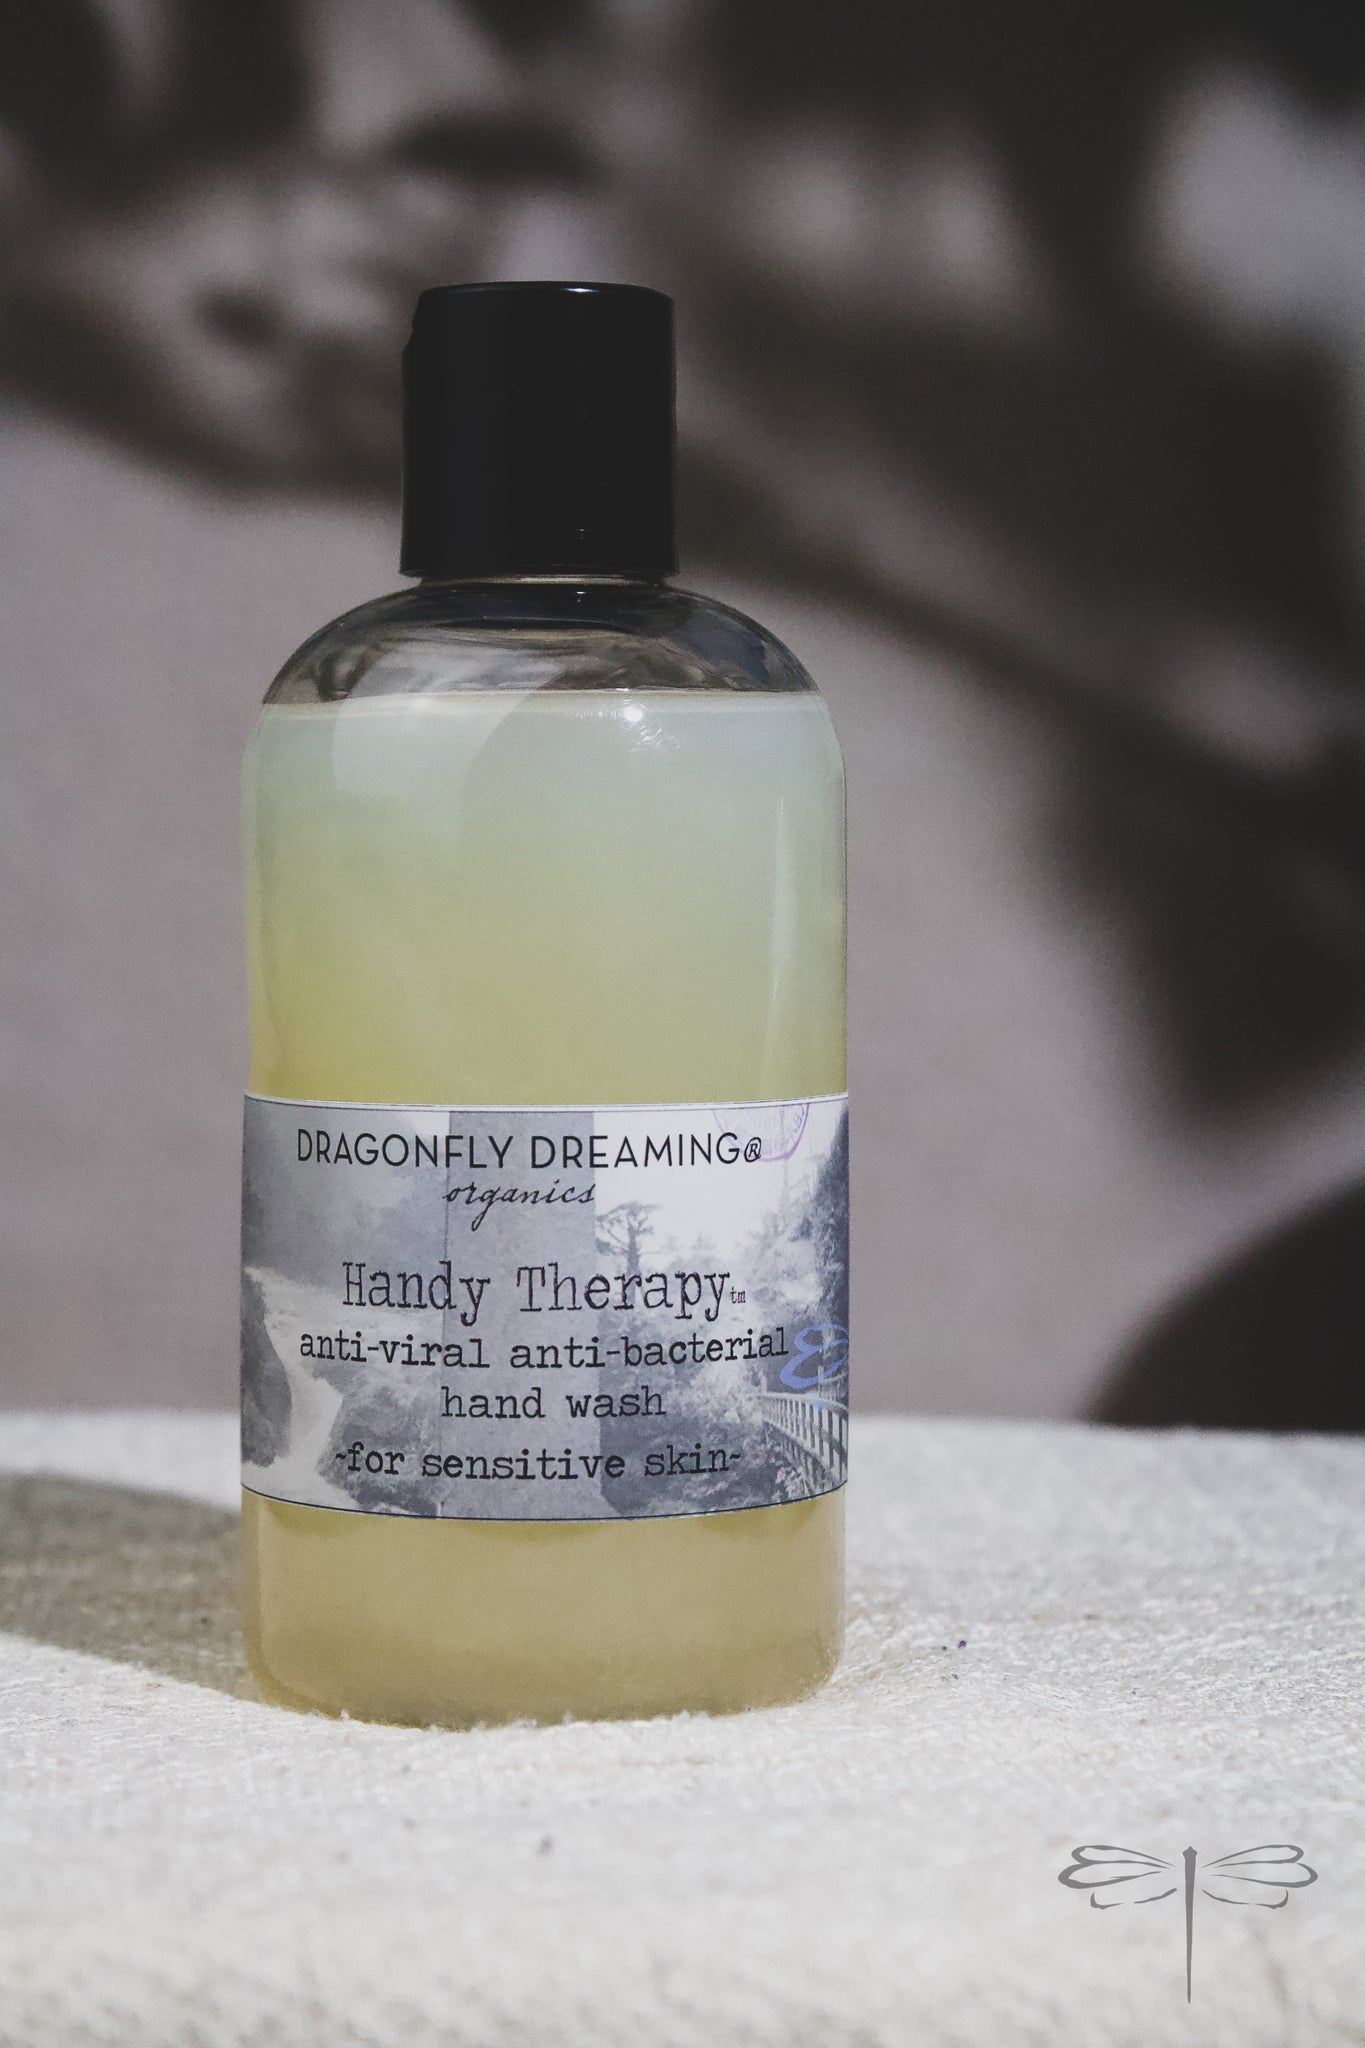 Handy Therapy Sanitizing Hand Wash by Dragonfly Dreaming Organics